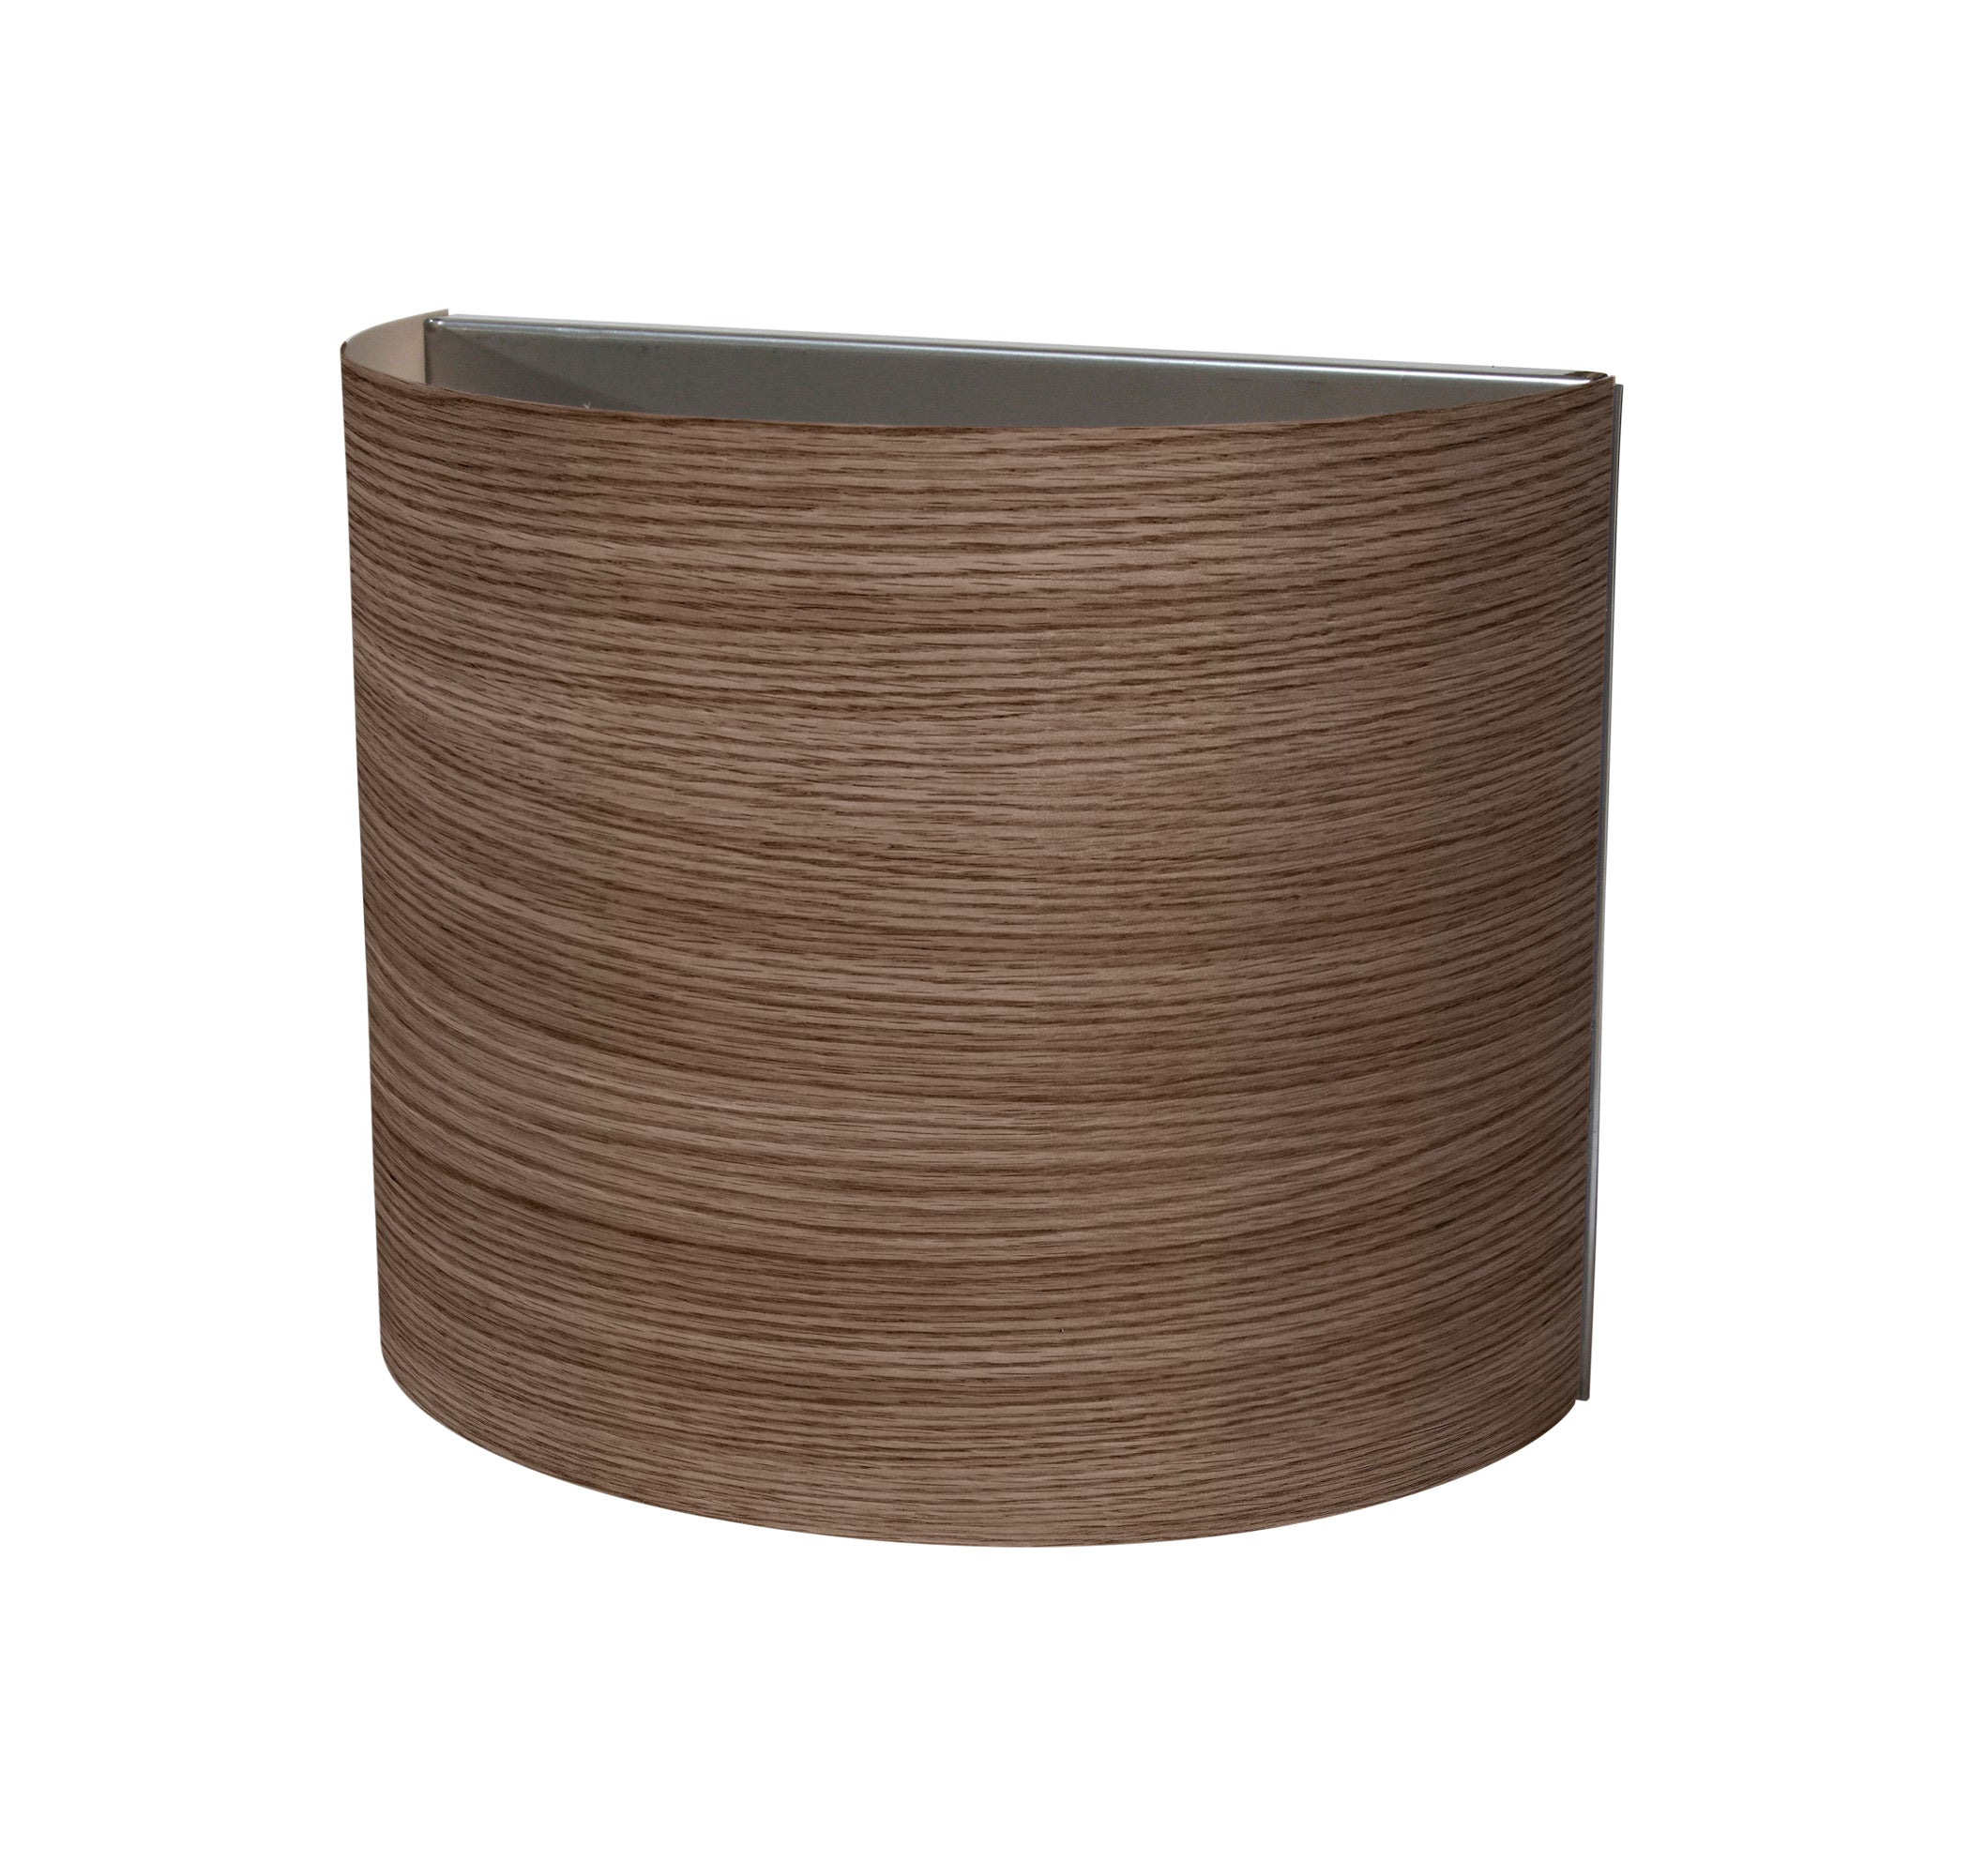 The Vita Wall Sconce from Seascape Fixtures in photo veneer, walnut color.